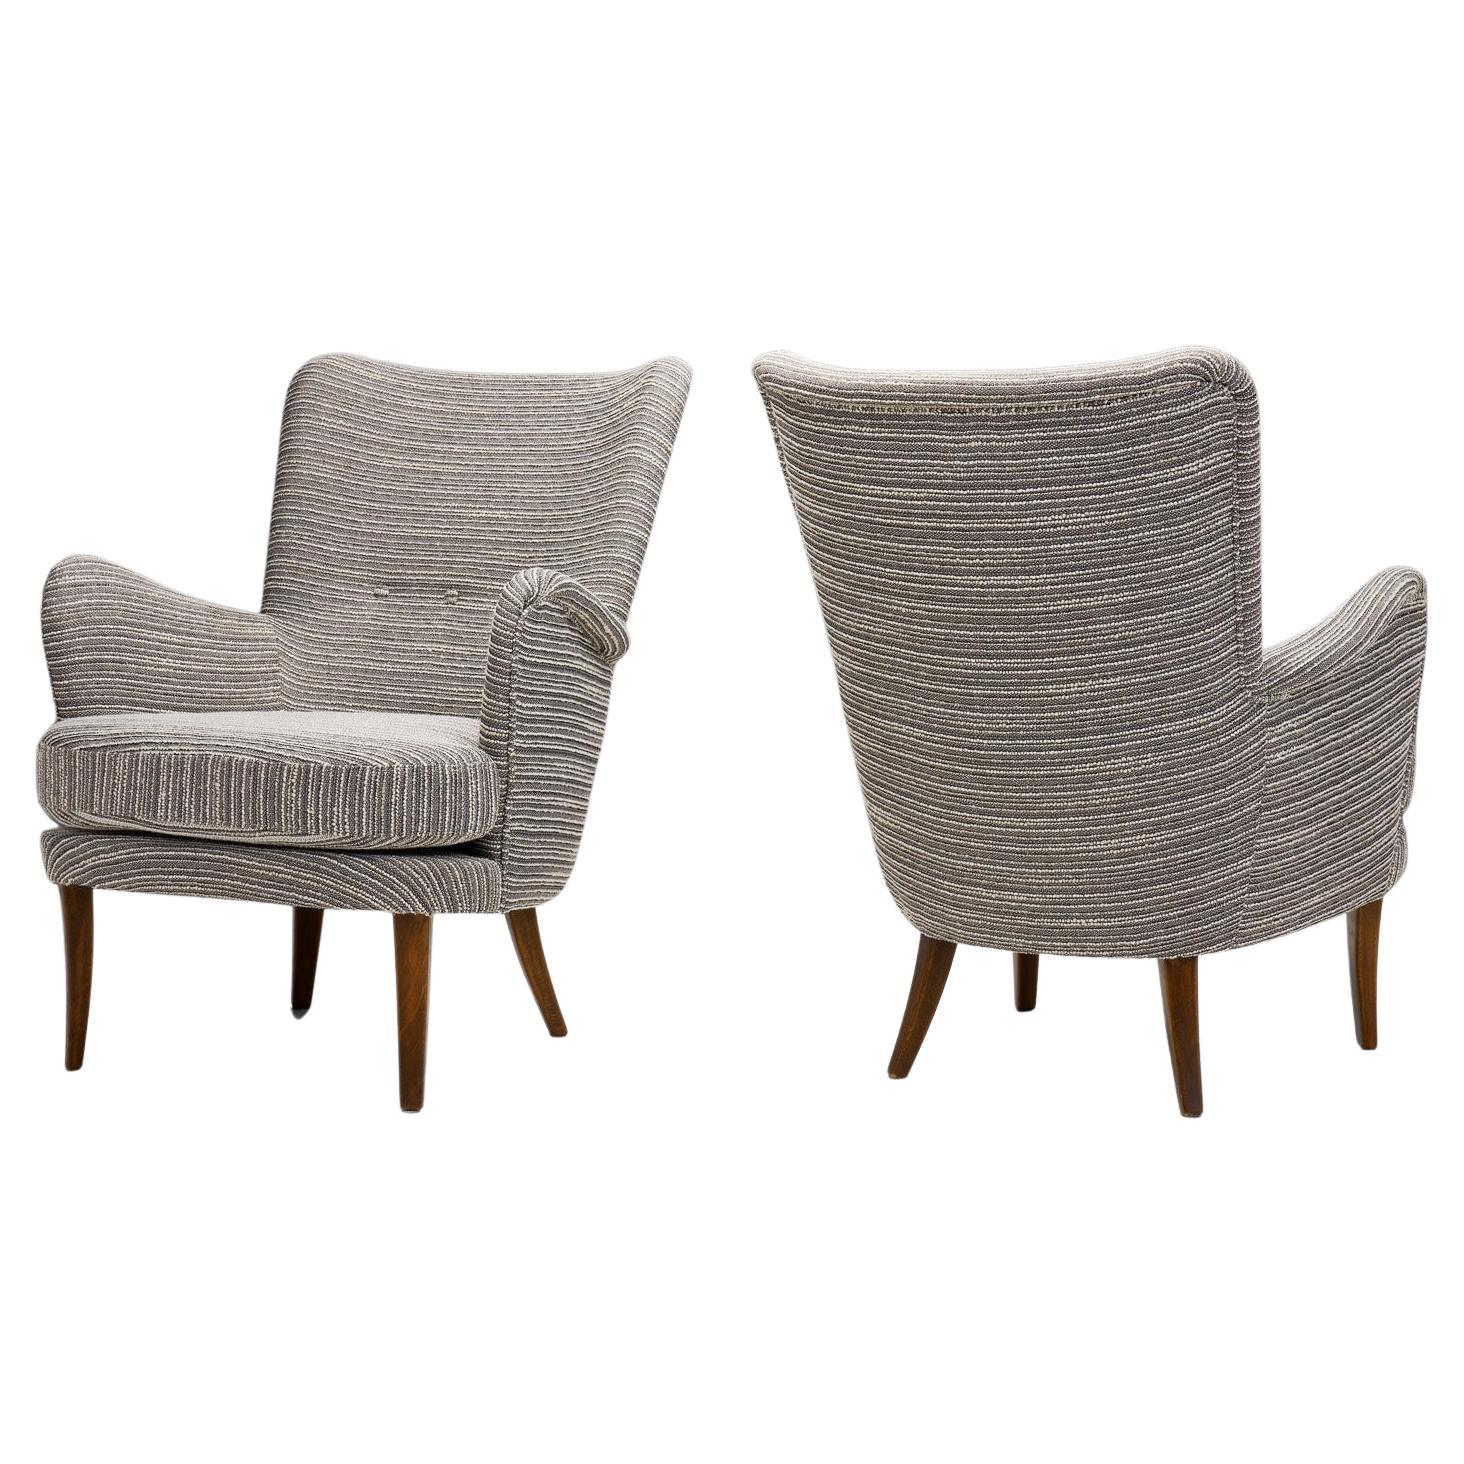 A Pair of "Stora Furulid” Armchairs by Carl Malmsten, Sweden 1950s For Sale